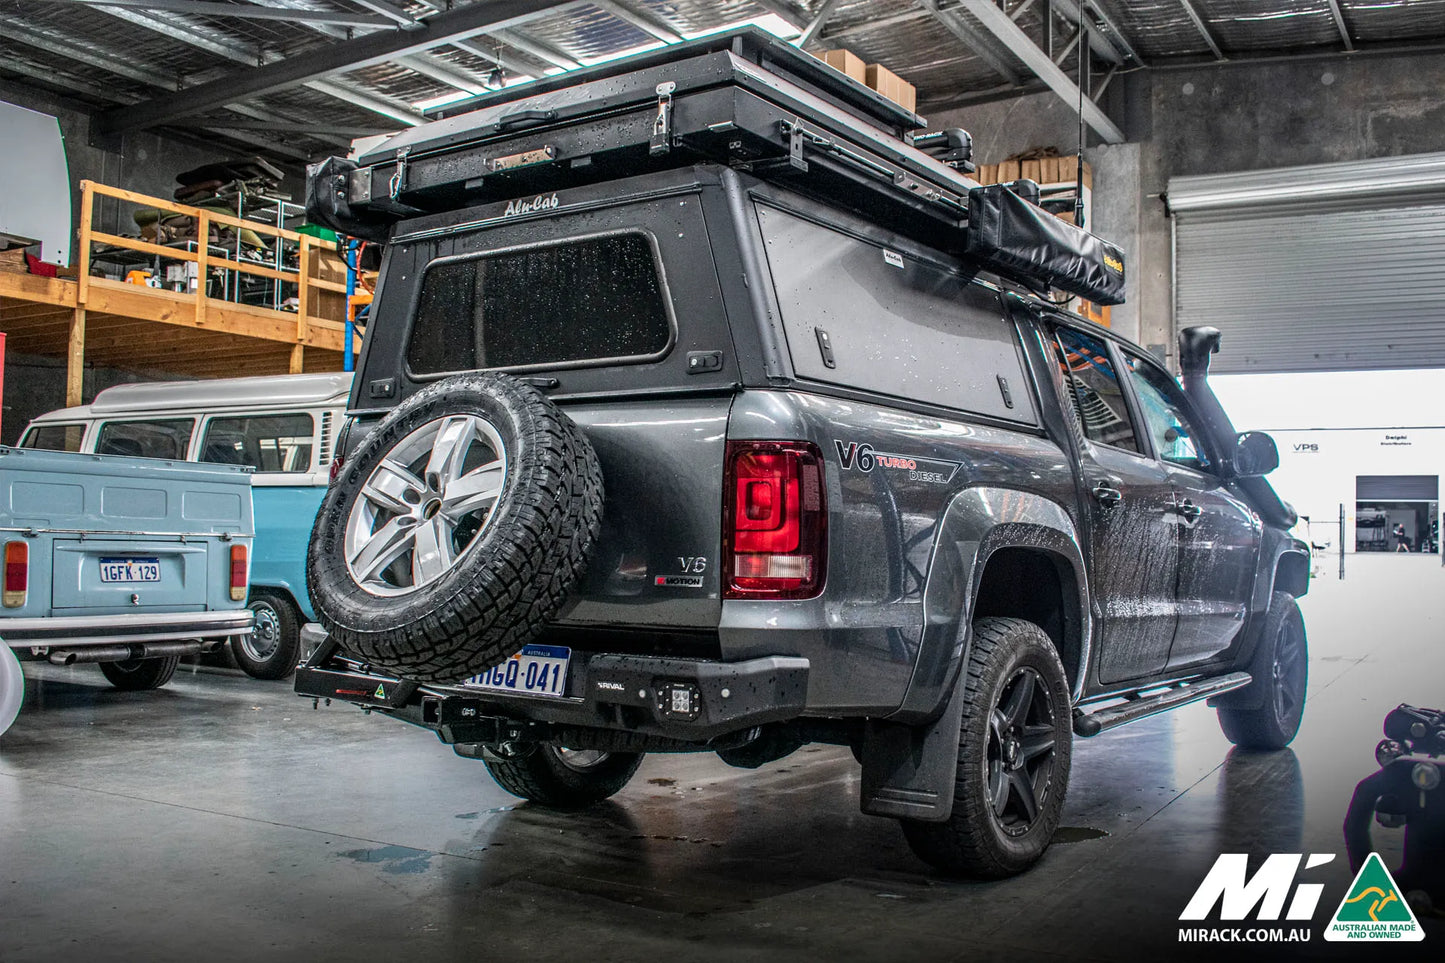 Amarok 4x4 rear transformed: Convenient access with a swinging spare tyre carrier.